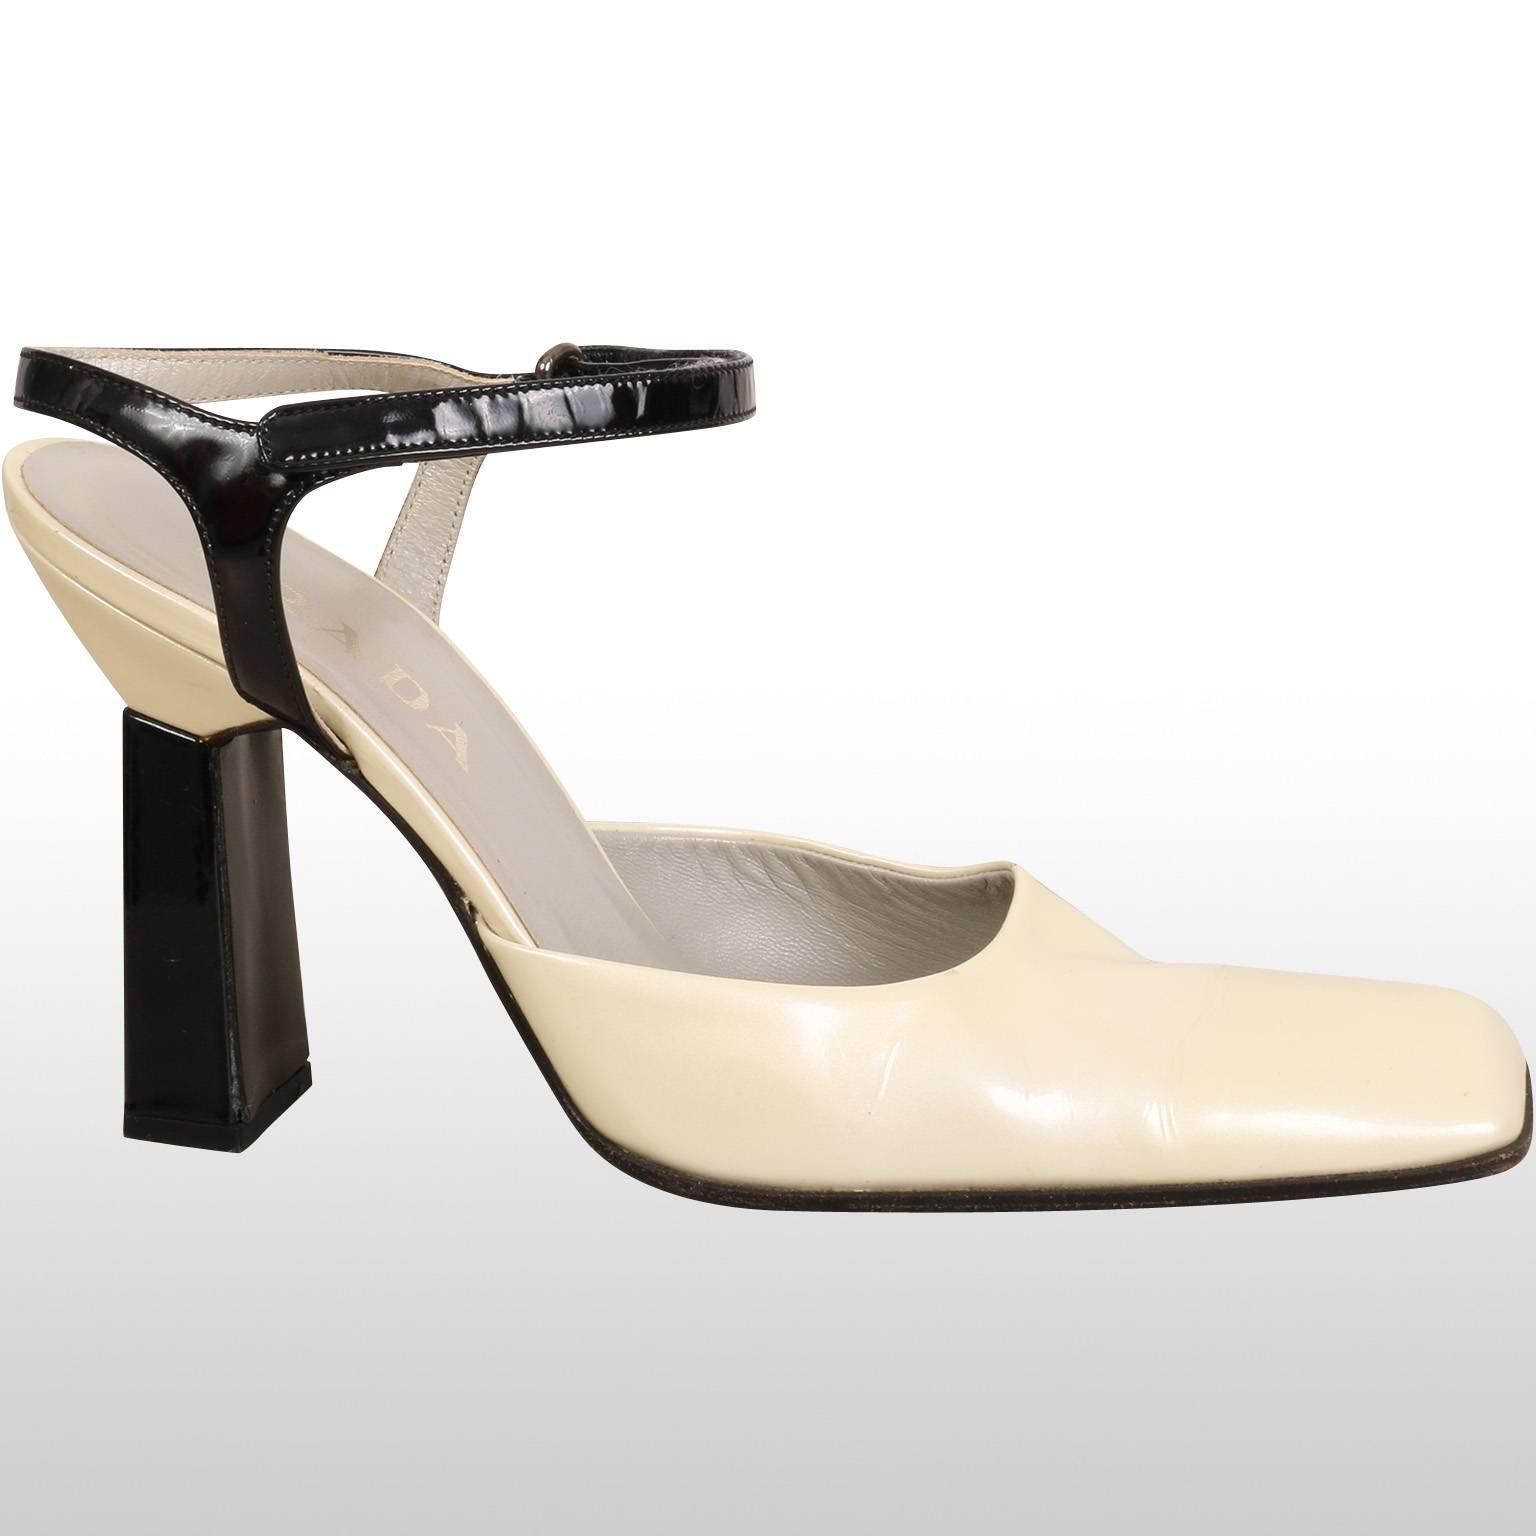 Beautiful staple Prada high heel sandal from the Autumn Winter 2001/02 runway collection. The shoe features a monochrome feel with block heel and squared toe. Elegant and timeless, the shoes can be worn on a day out in the city, for a luncheon or a